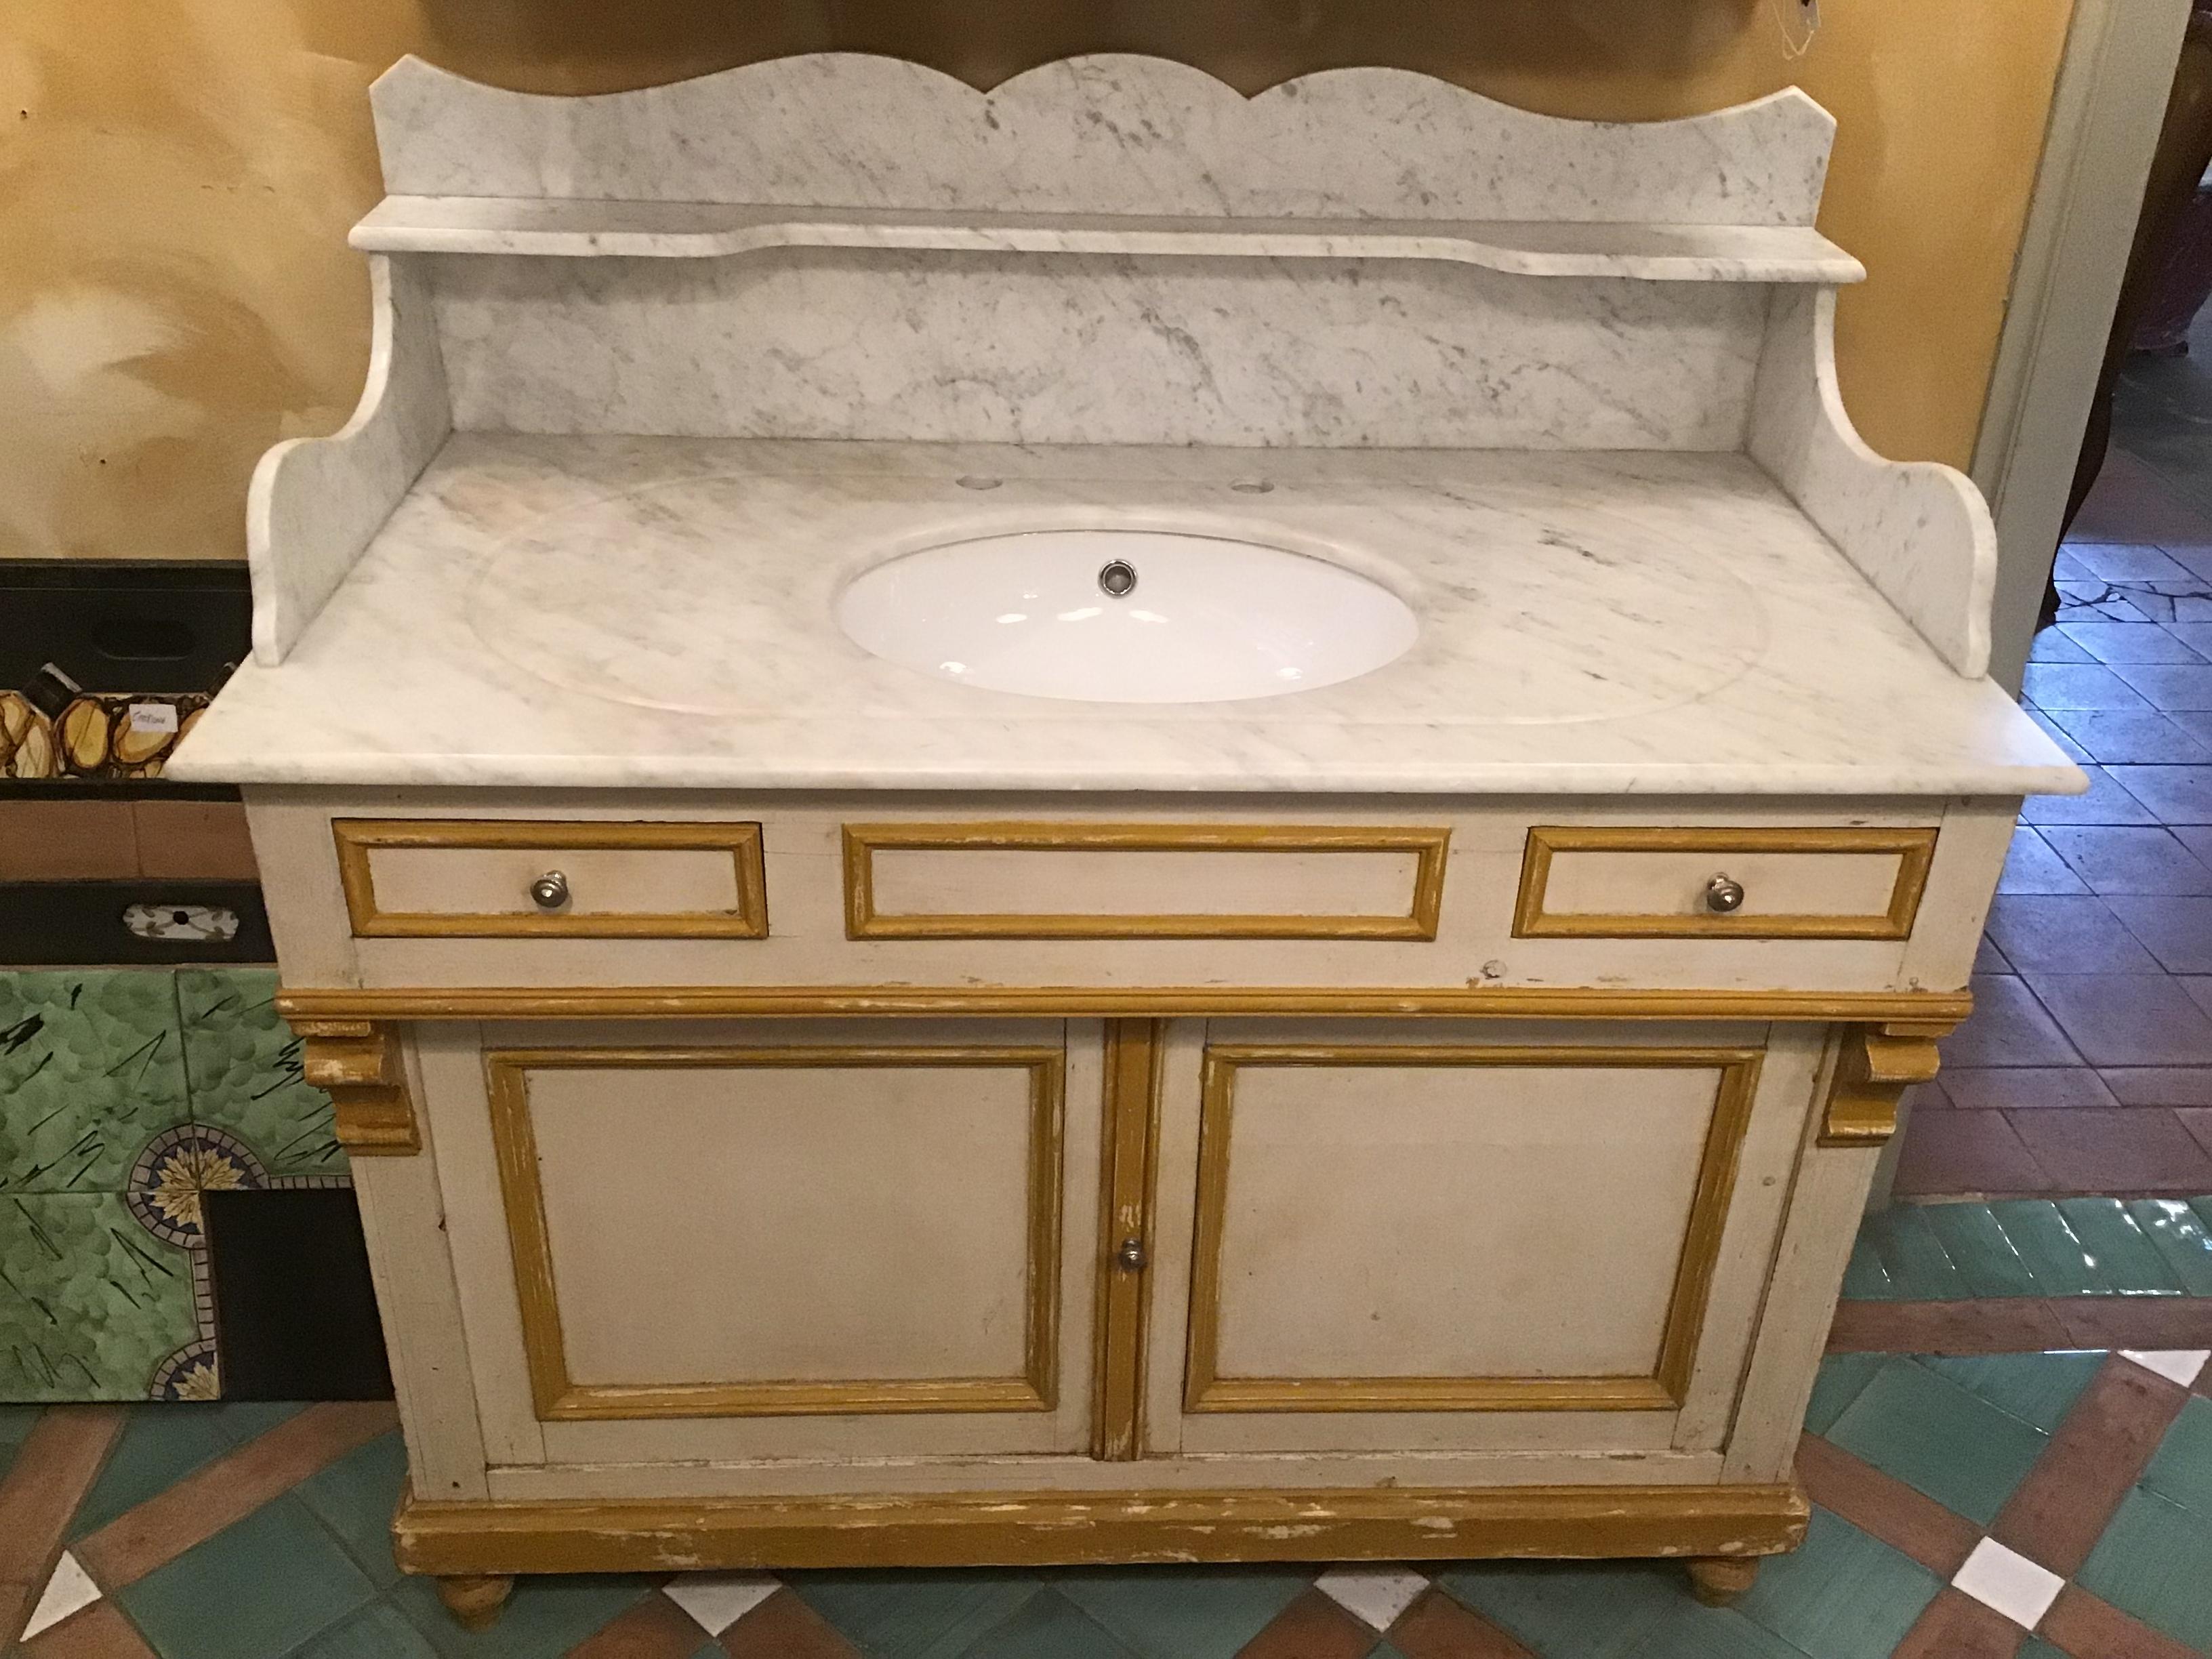 Hand-Painted 19th Century Italian Painted Wood Cupboard Sink with Carrara Marble Top, 1890s